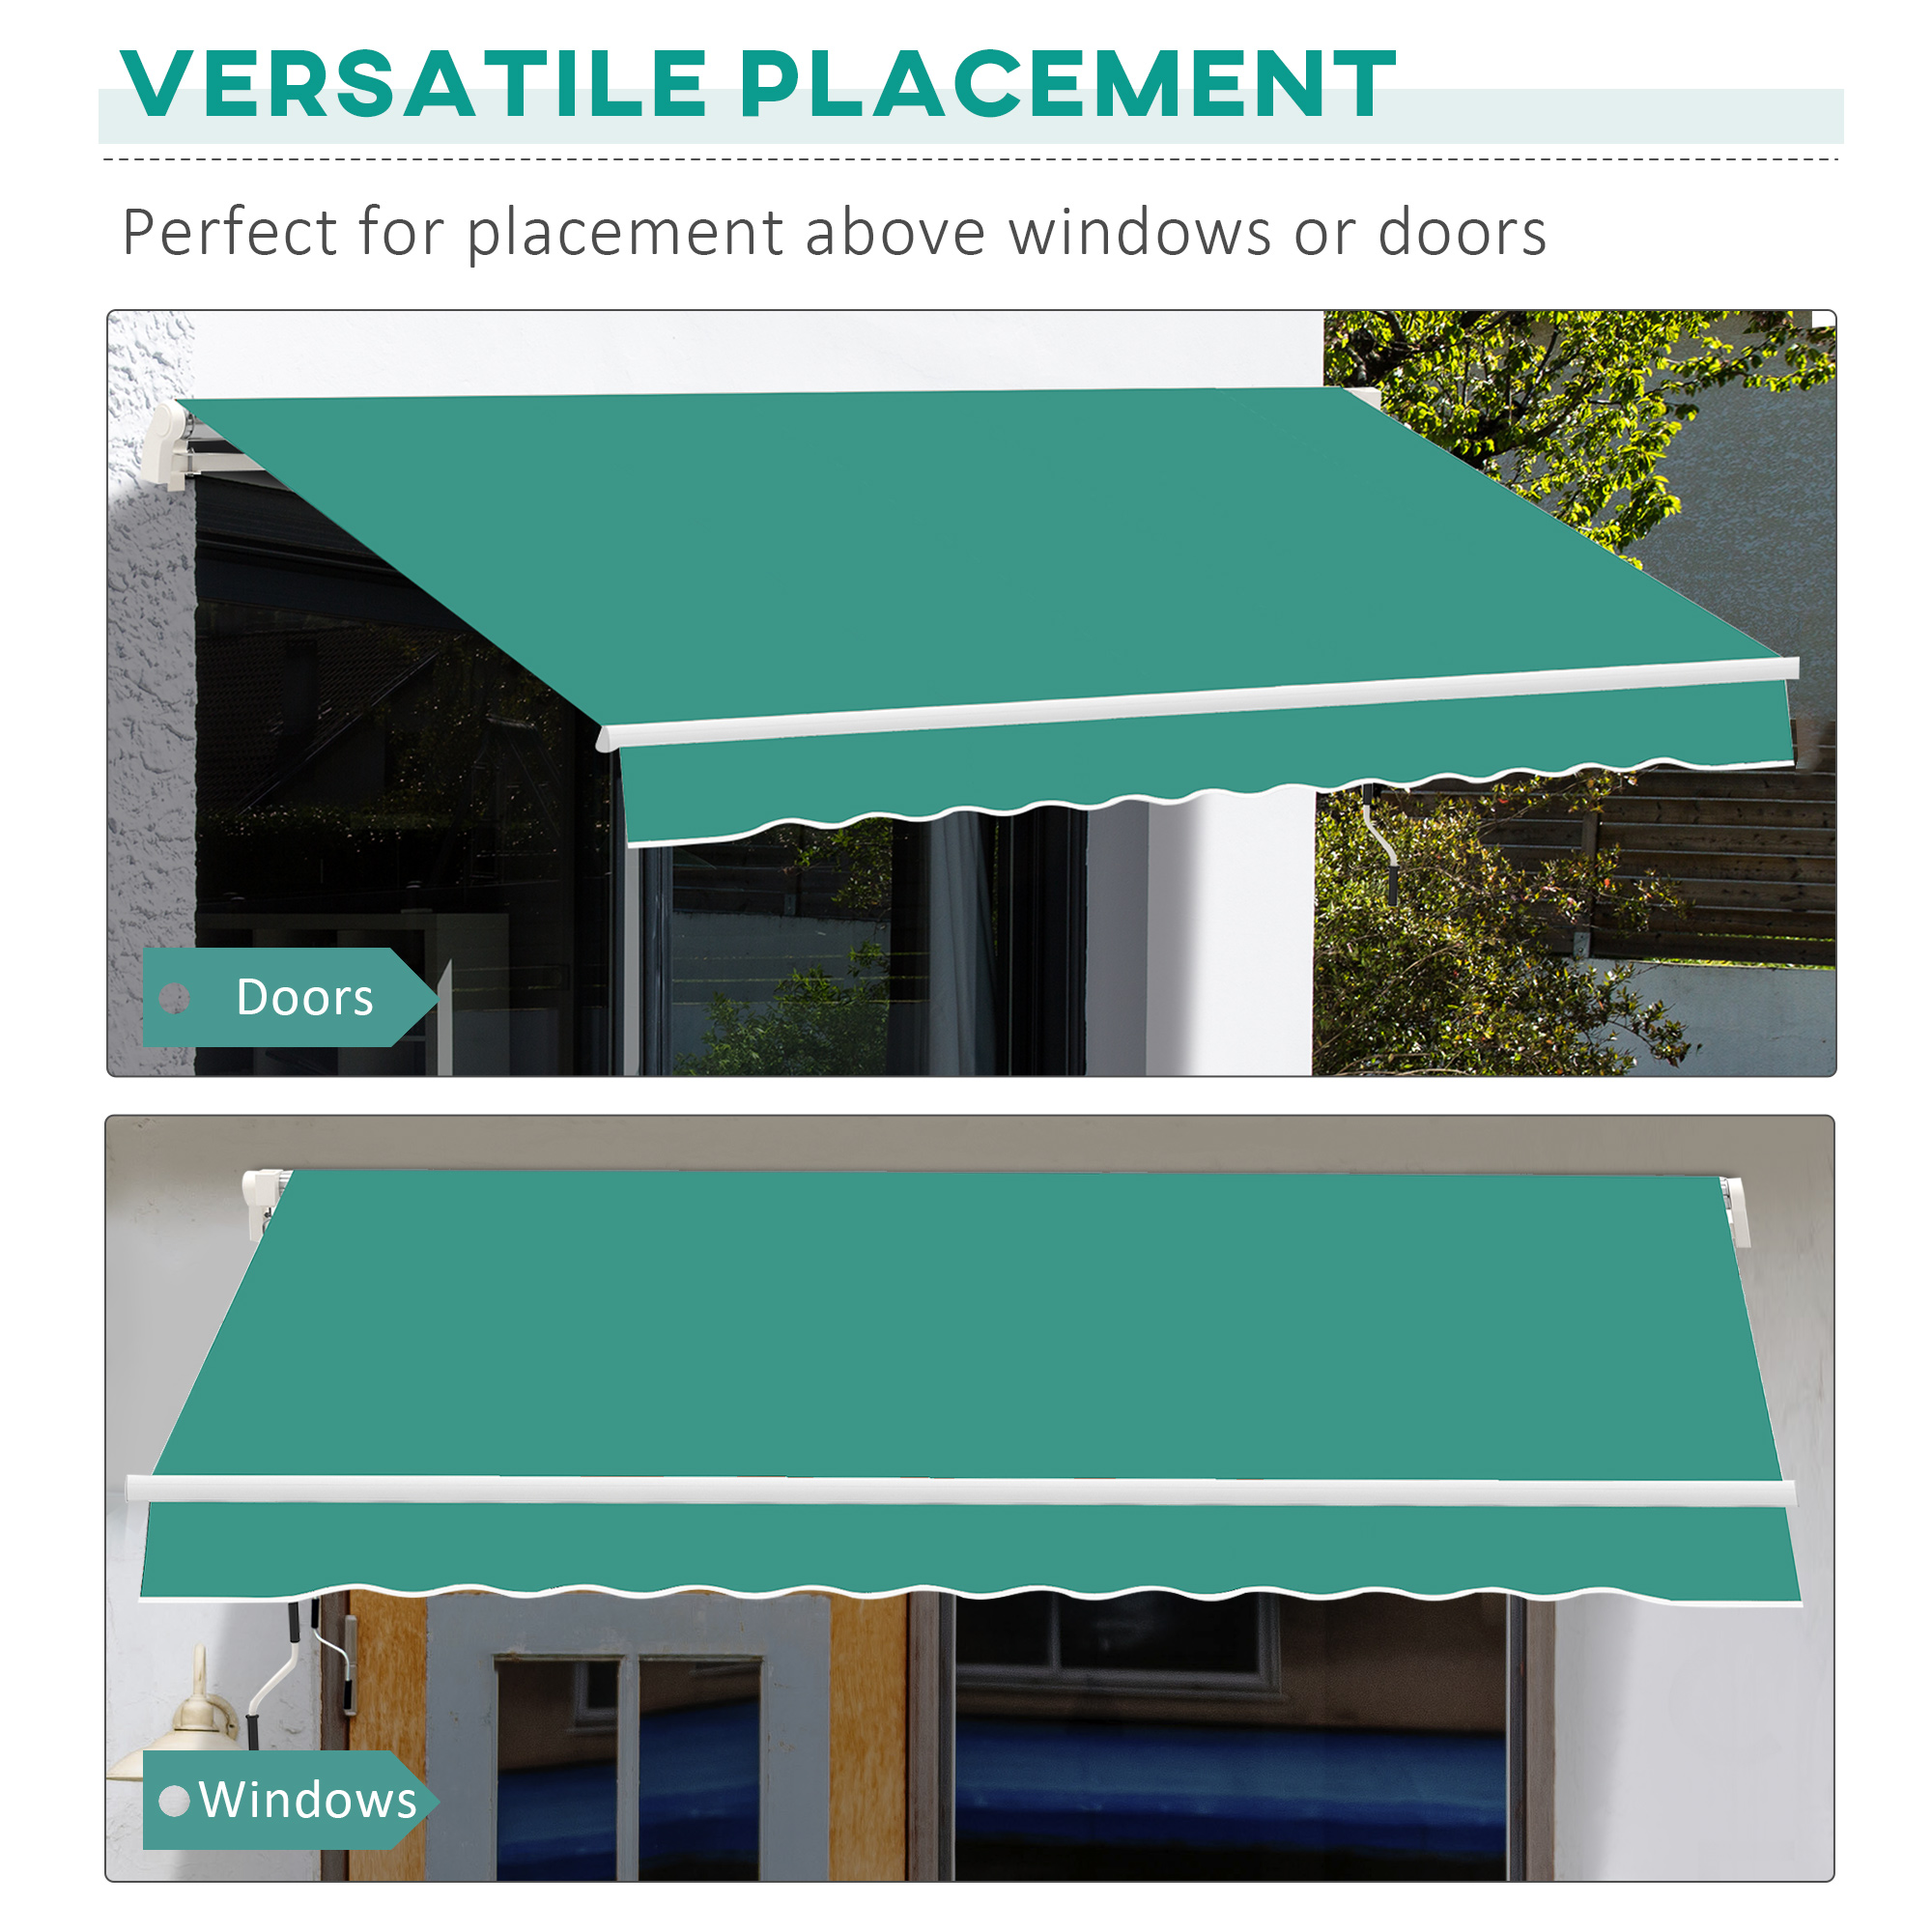 Outsunny 13' x 8' Green Manually Retractable Patio Awning - image 4 of 9